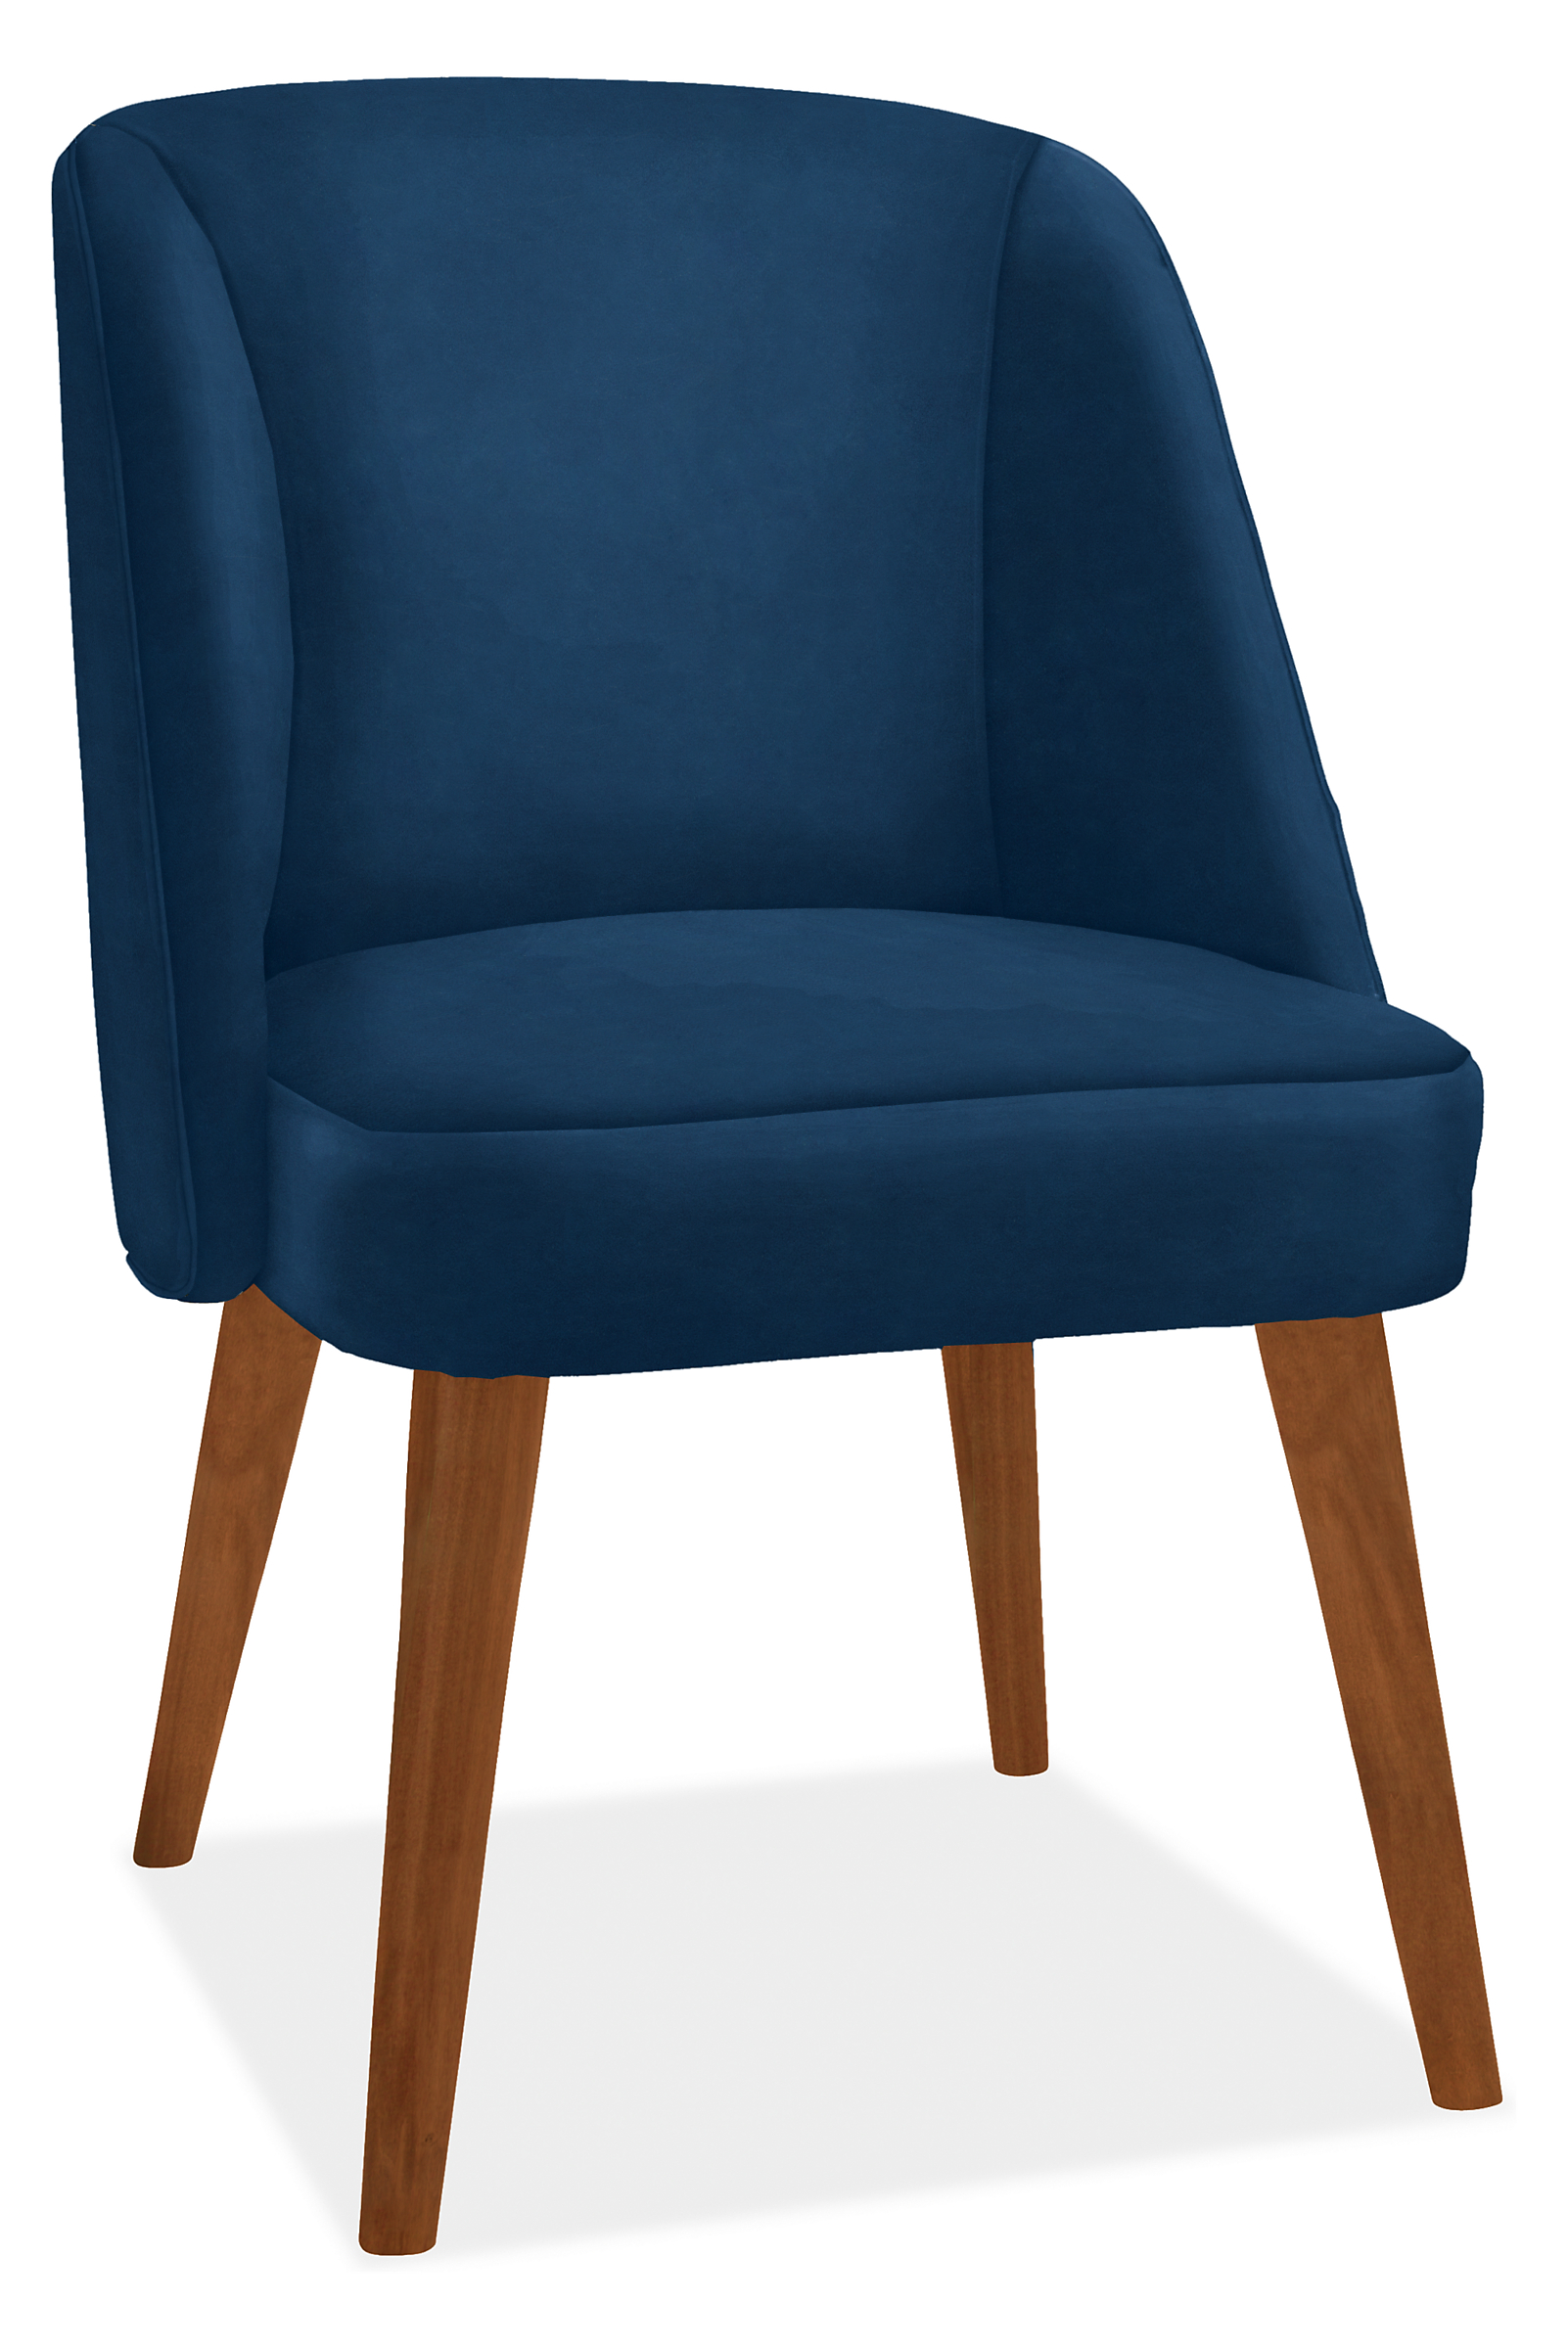 Cora Side Chair in View Indigo with Mocha Legs